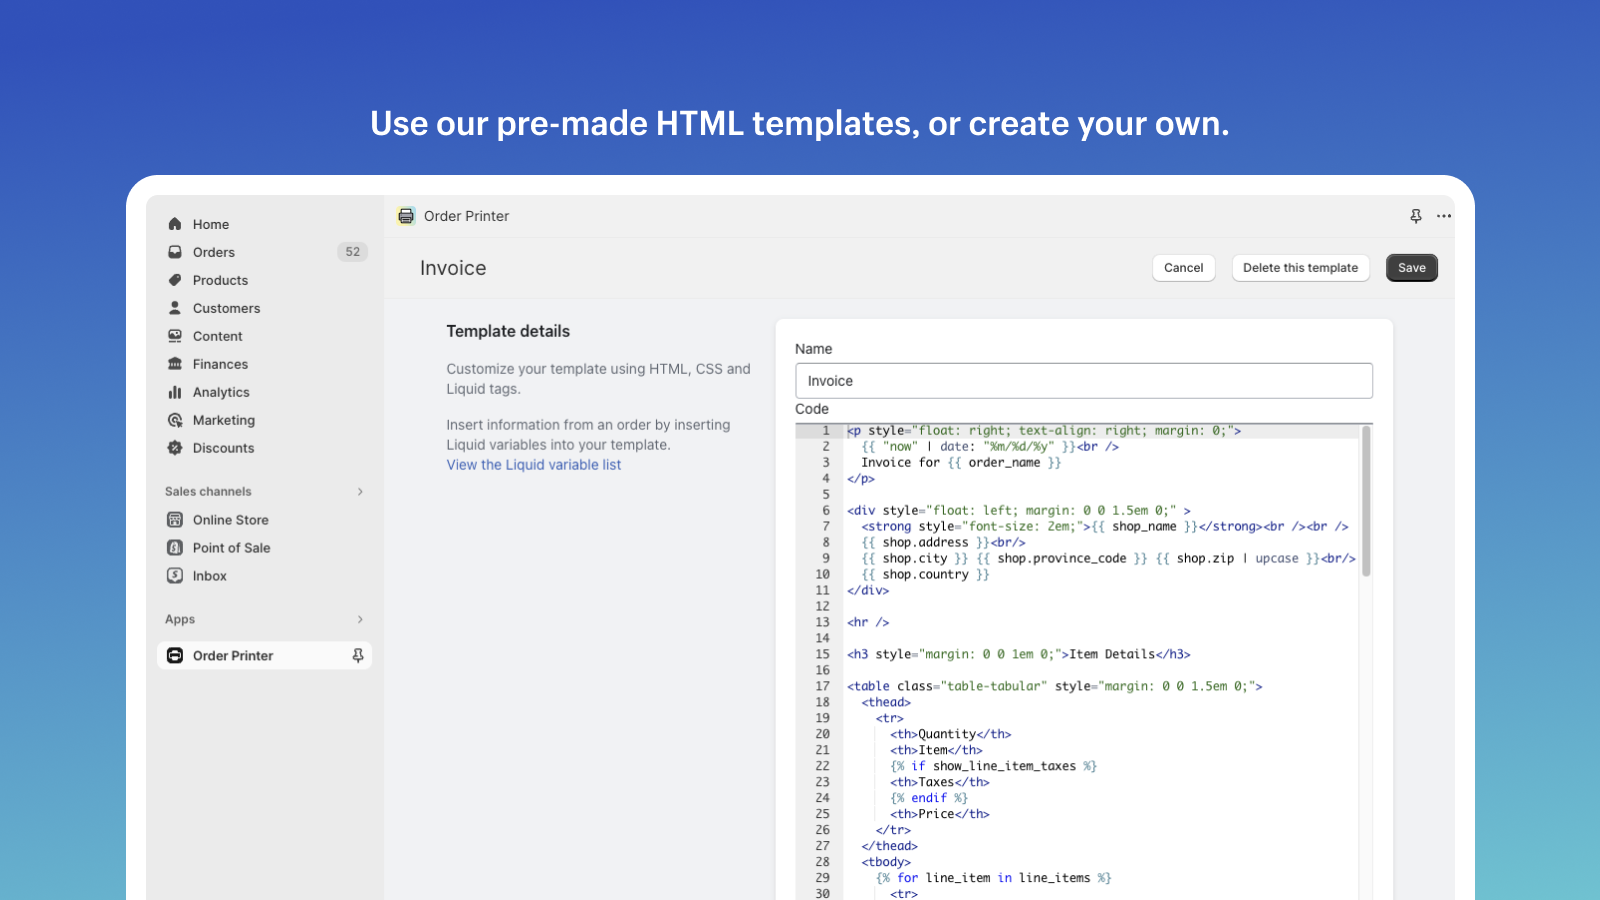 Use our pre-made HTML templates, or create your own.